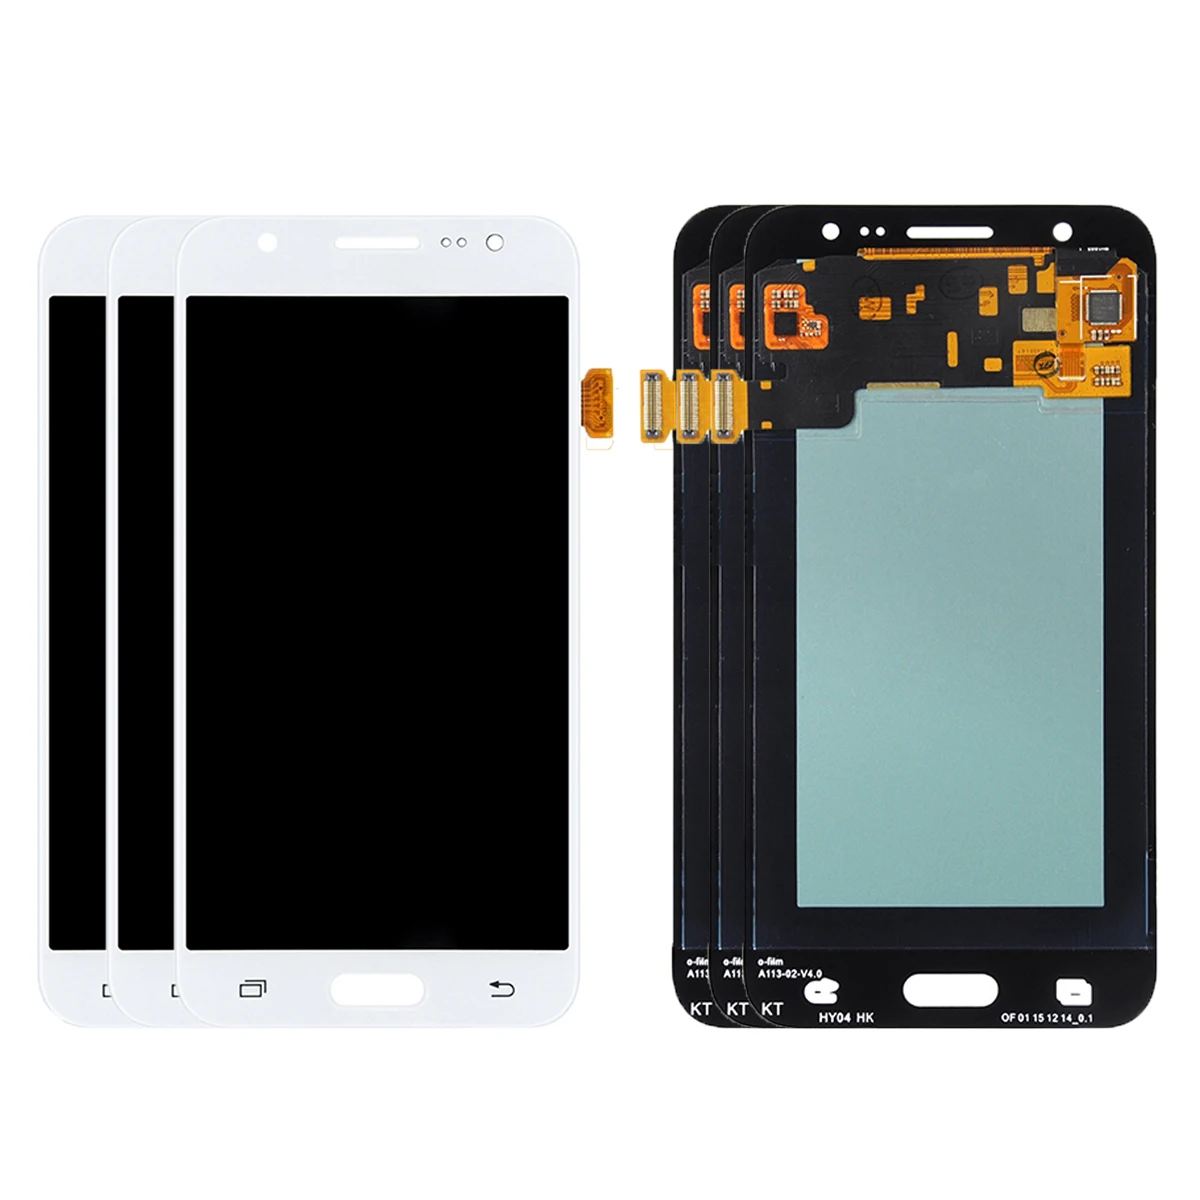 Wholesale j500 Display For Samsung Galaxy J5 2015 J500 lcd SM-J500H J500FN J500F j500 LCD with Touch Screen Digitizer Assembly enlarge